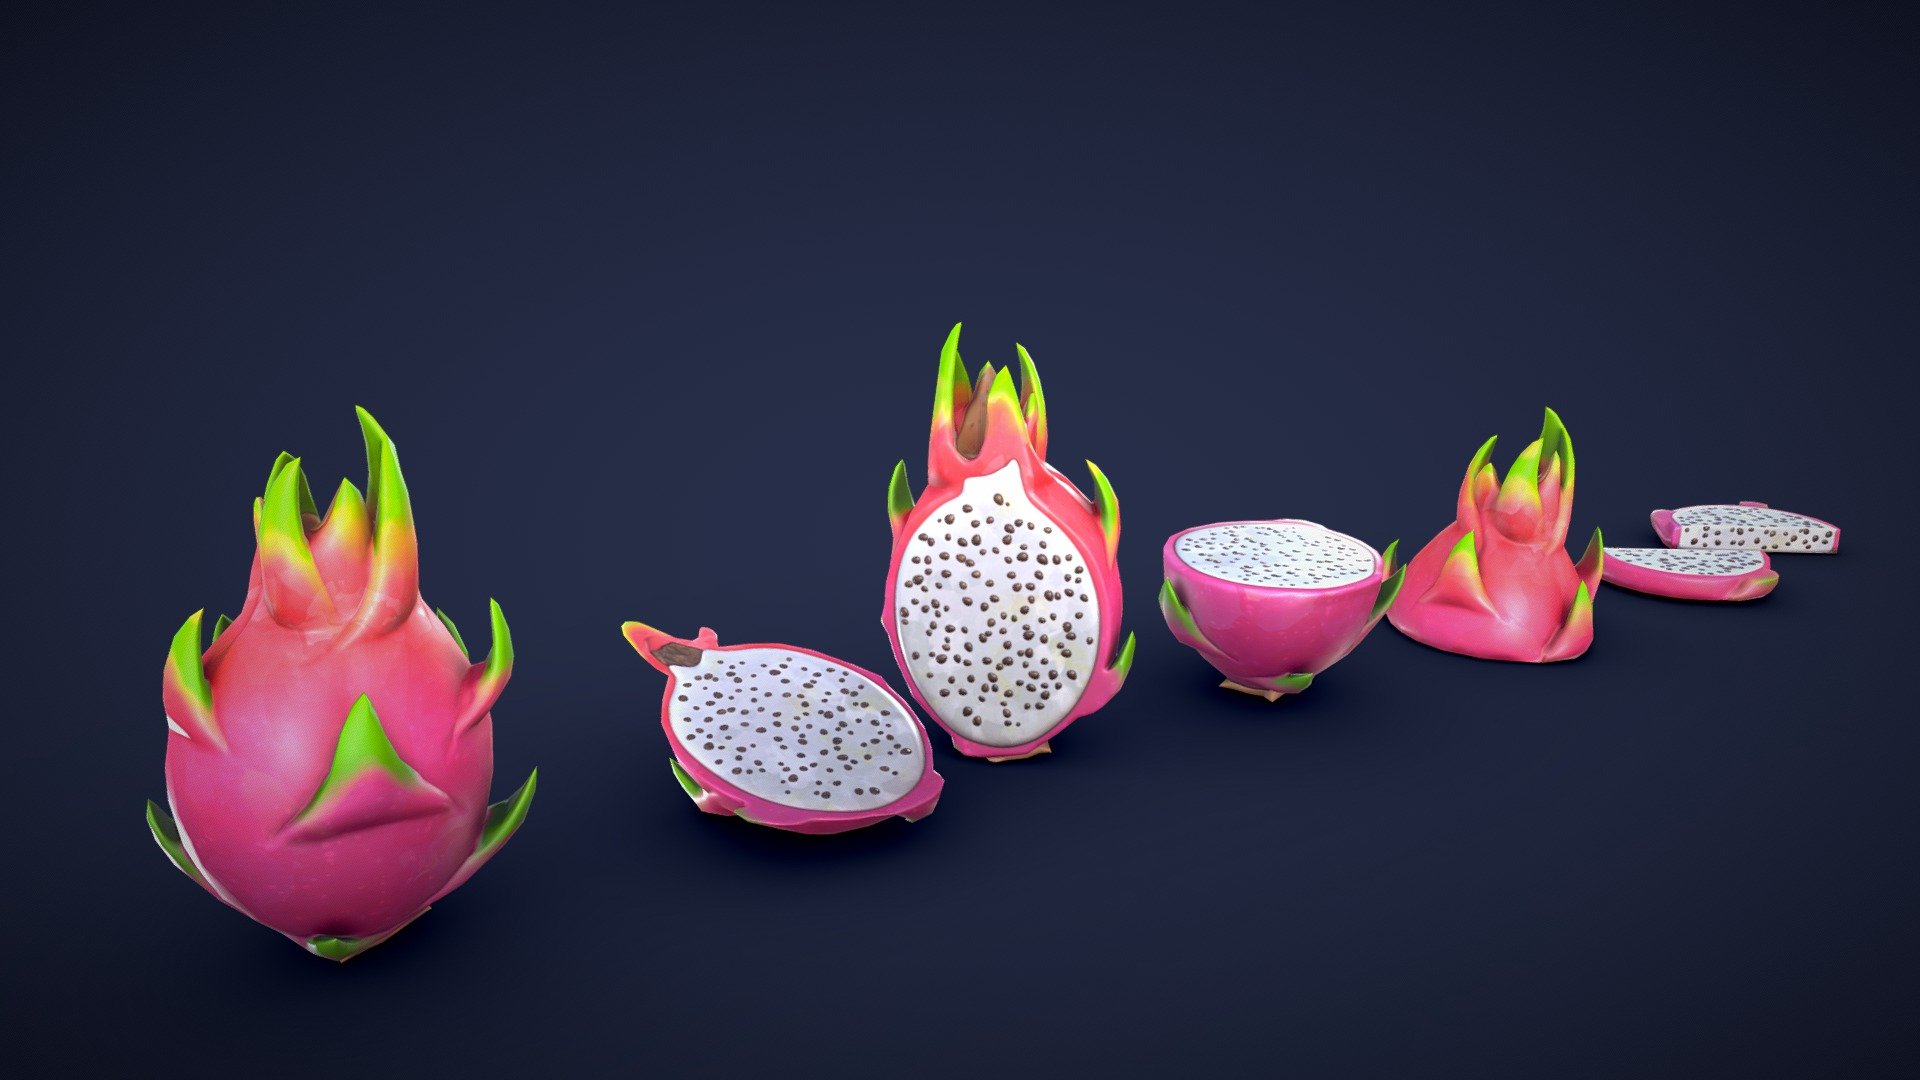 This asset pack contains 7 different pitaya / dragon fruit meshes. Whether you need an asset for a market scene or some props for an enviroment, this 3D stylized pitaya / dragon fruit asset pack has you covered! 

Model information:




Optimized low-poly assets for real-time usage.

Optimized and clean UV mapping.

2K and 4K textures for the assets are included.

Compatible with Unreal Engine, Unity and similar engines.

All assets are included in a separate file as well.
 - Stylized Pitaya / Dragon Fruit - Low Poly - Buy Royalty Free 3D model by Lars Korden (@Lark.Art) 3d model